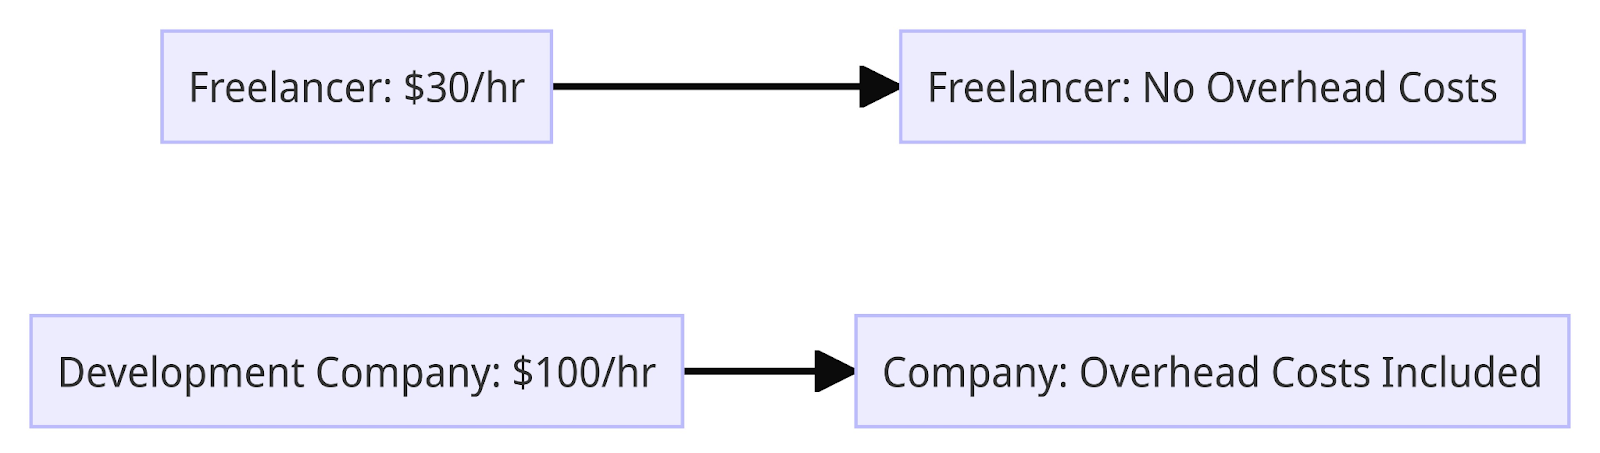 The Cost Graph for Freelancer and Company